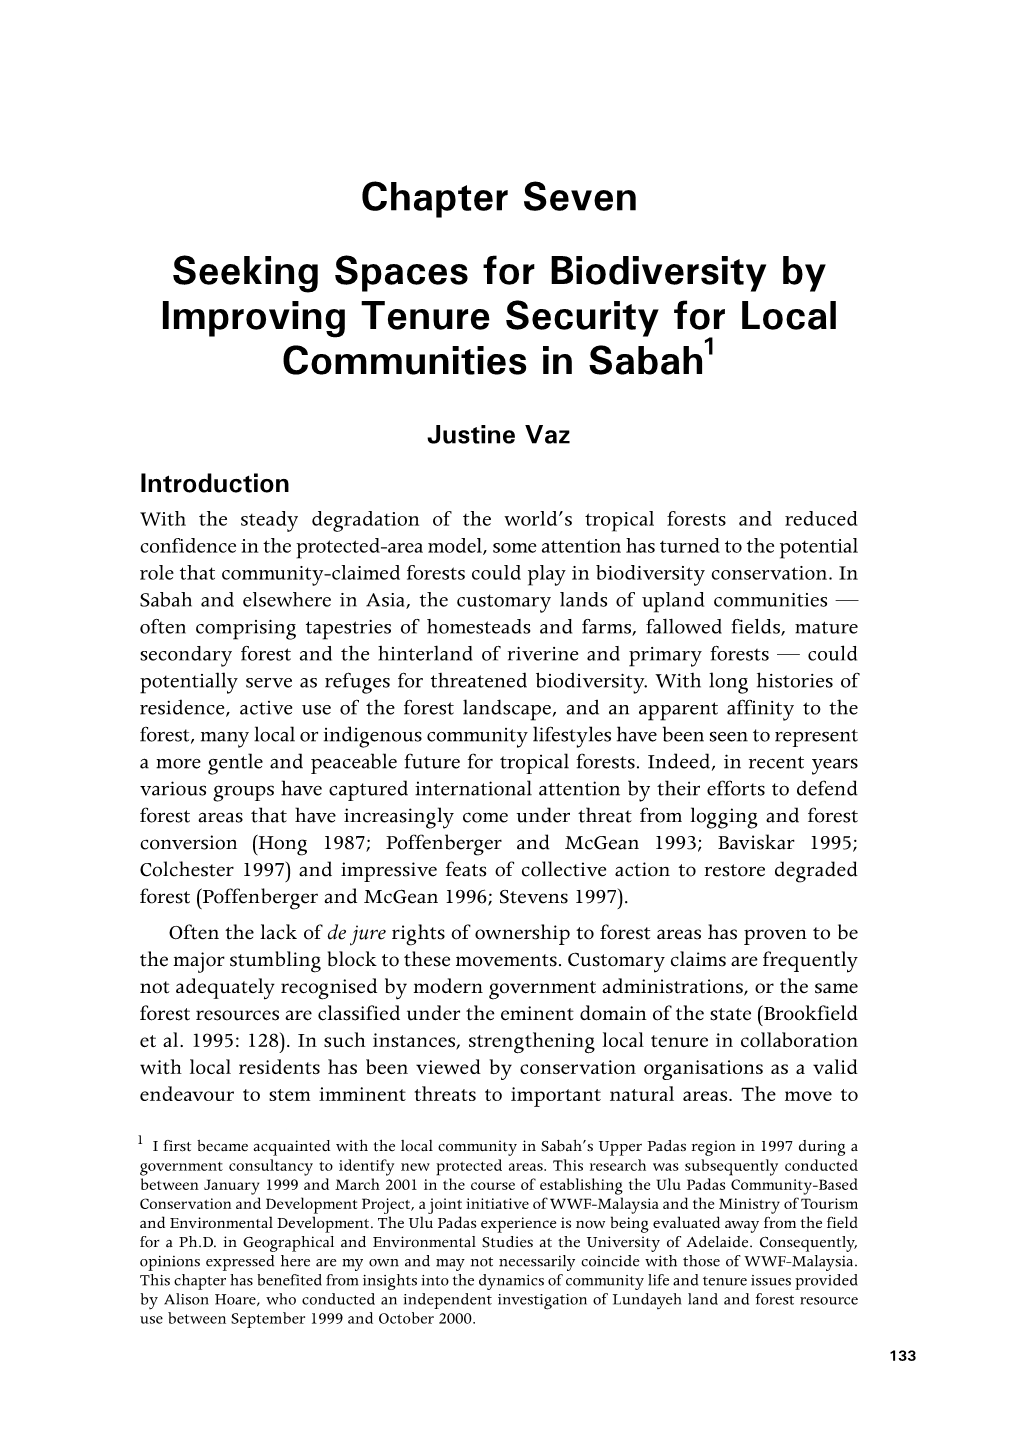 State, Communities and Forests in Contemporary Borneo (Figure 7.1) (Mannan and Awang 1997: 2).2 Globally, Ulu Padas Is of Considerable Conservation Significance